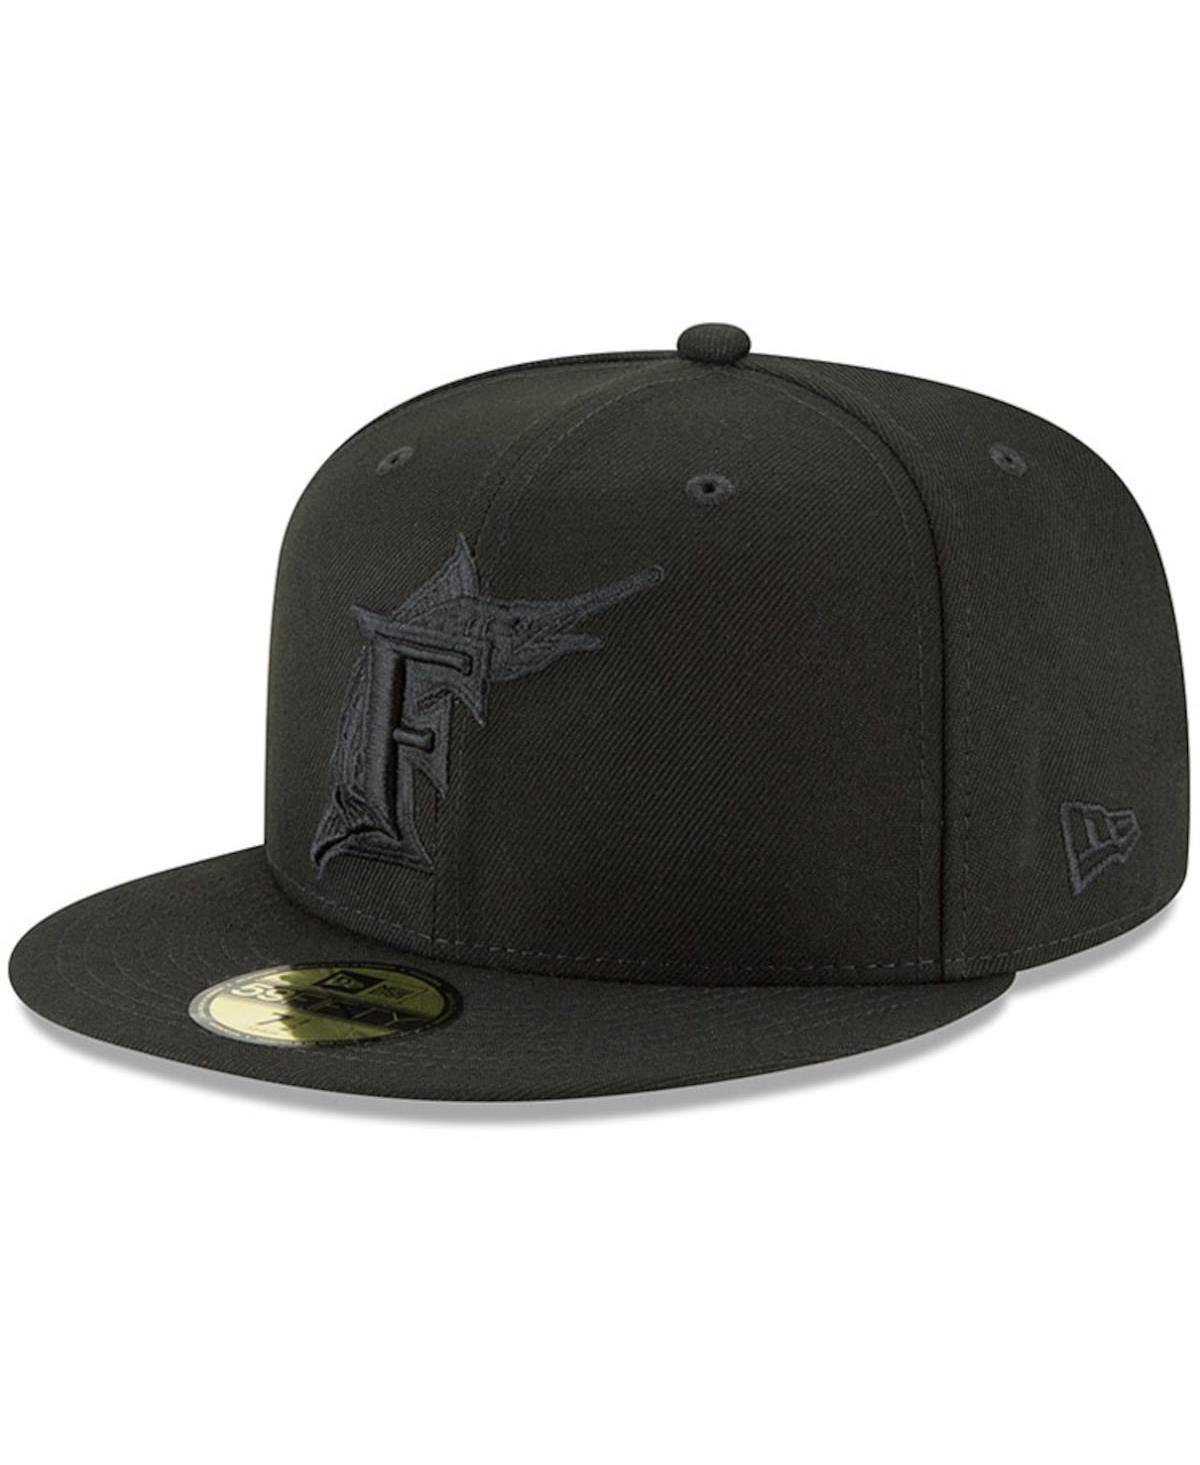 Men's New Era Black Florida Marlins Throwback Primary Logo Basic 59Fifty Fitted Hat - Black